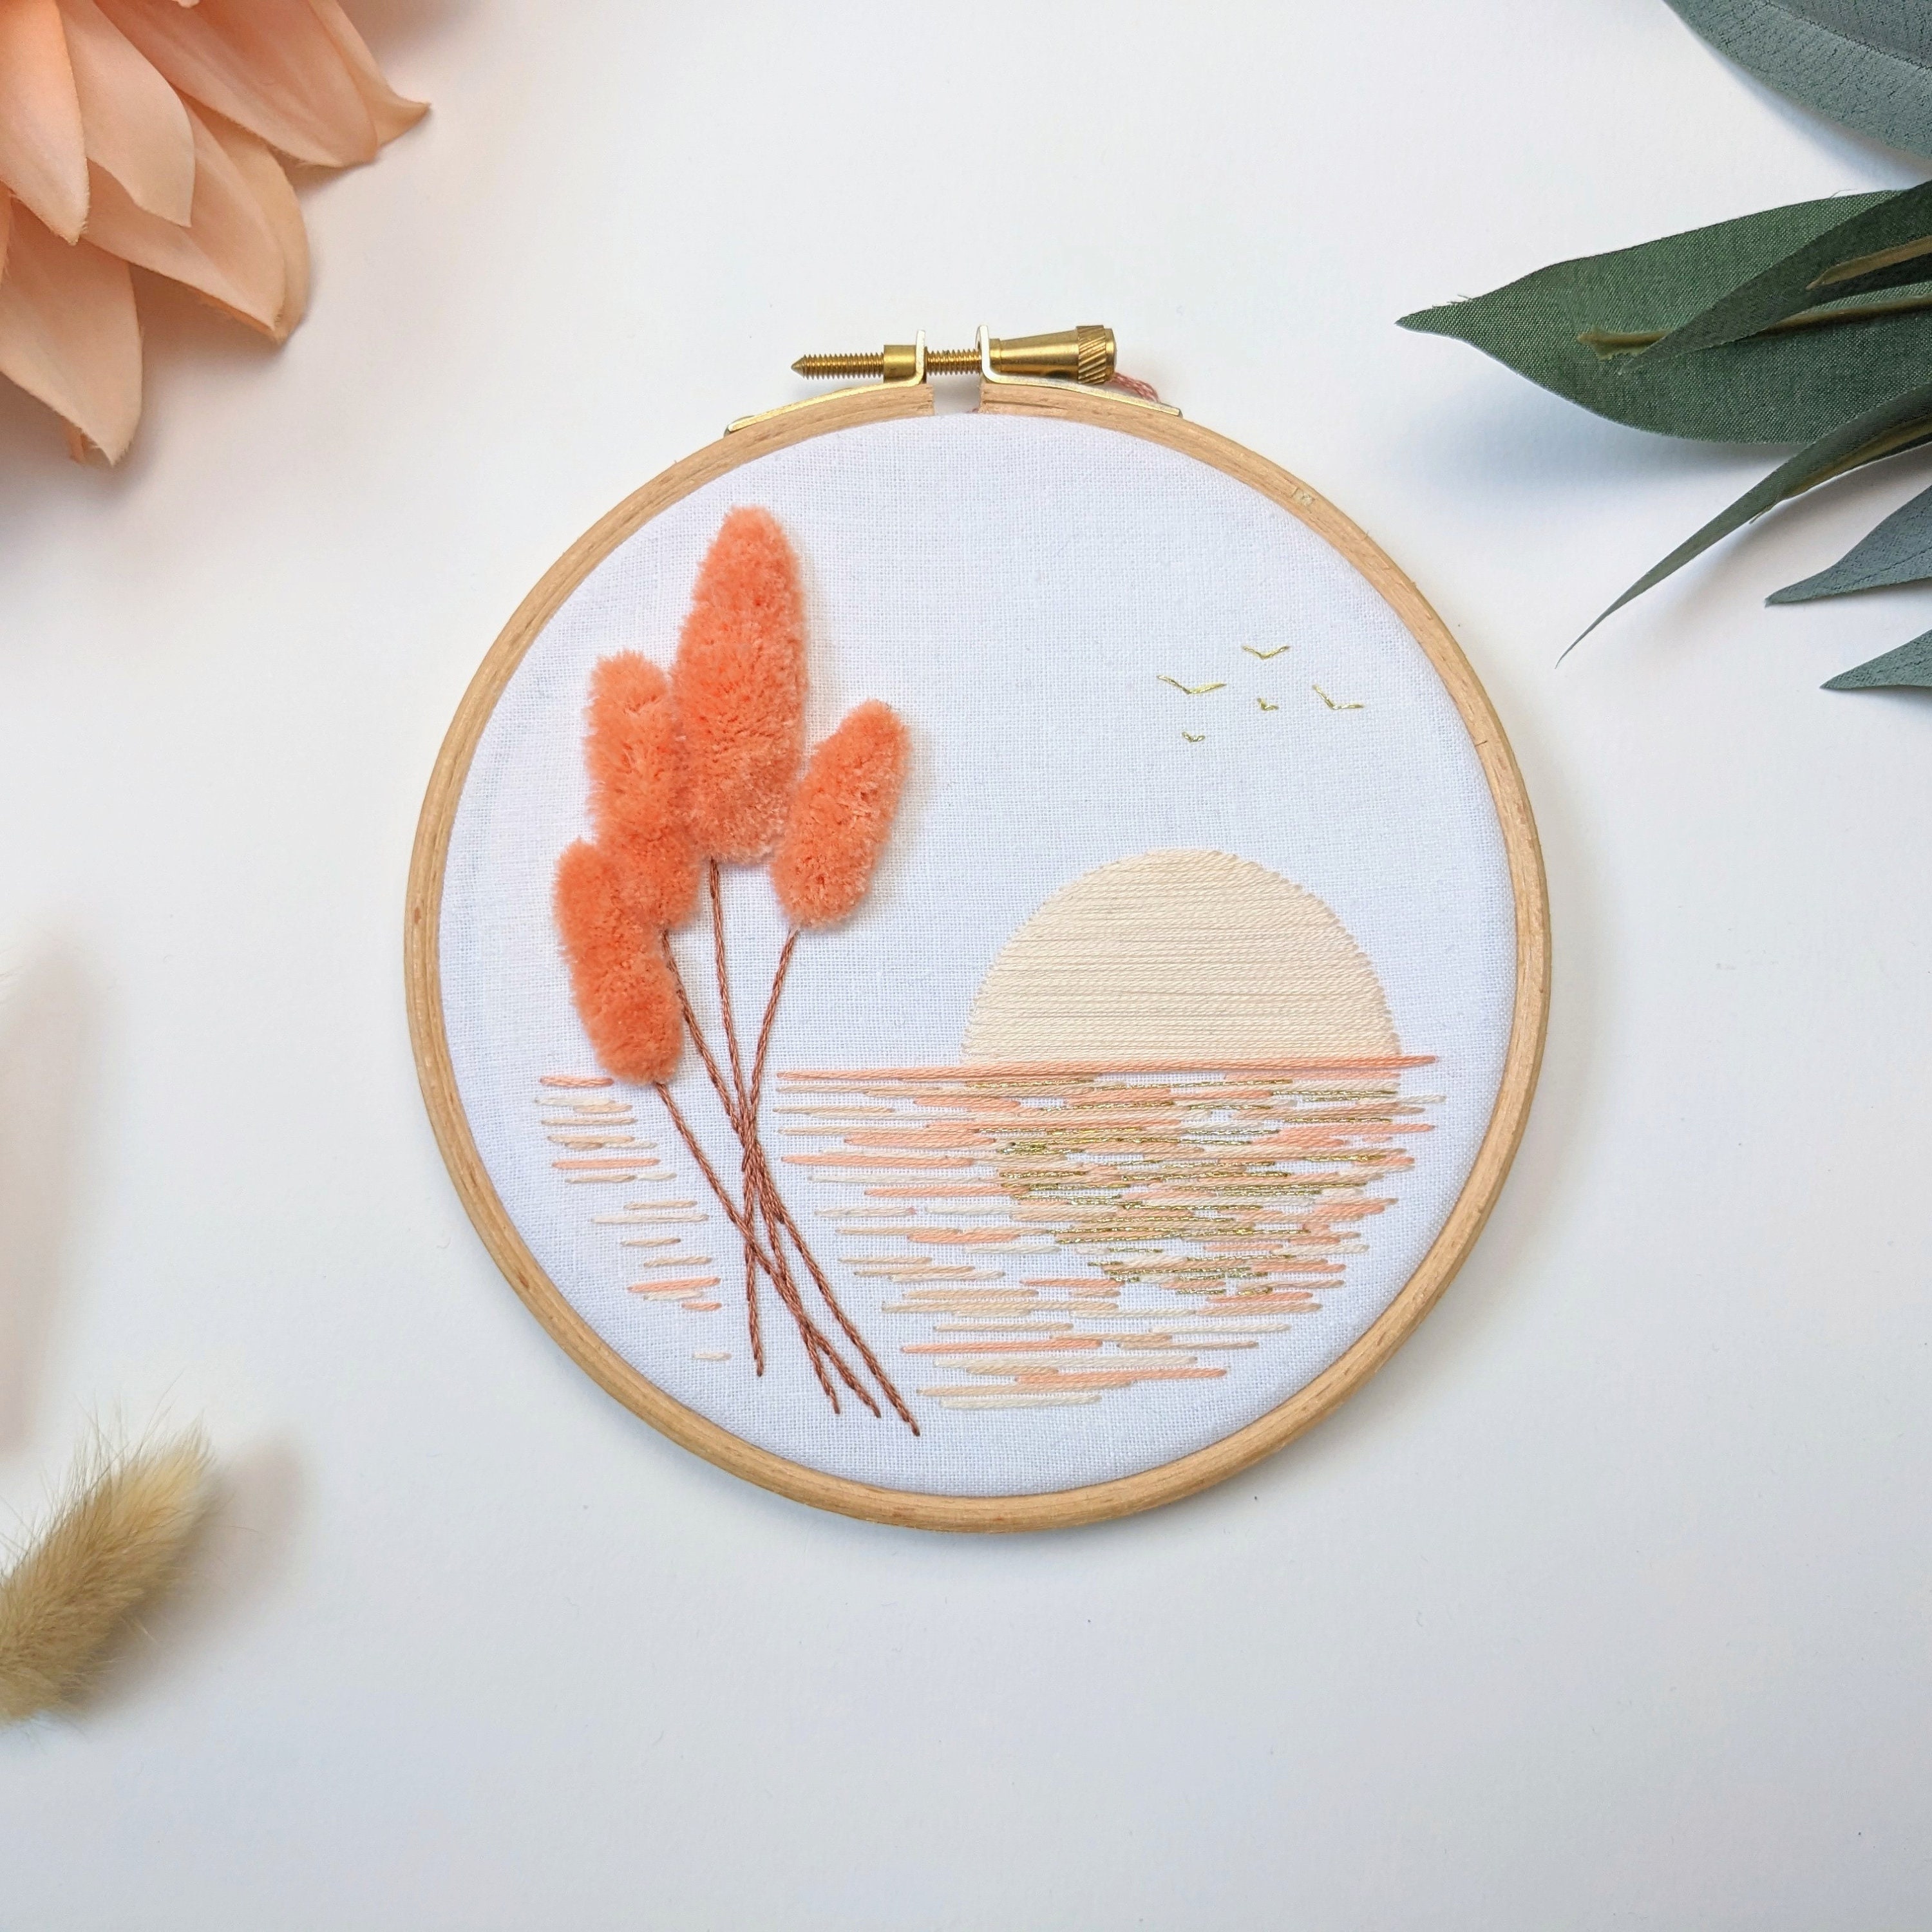 Sunset Lake Mini Easy Embroidery Kit Floral and Nature Theme Golden Hour  Summer Minimalist Aesthetic DIY Craft and Unique Gift 